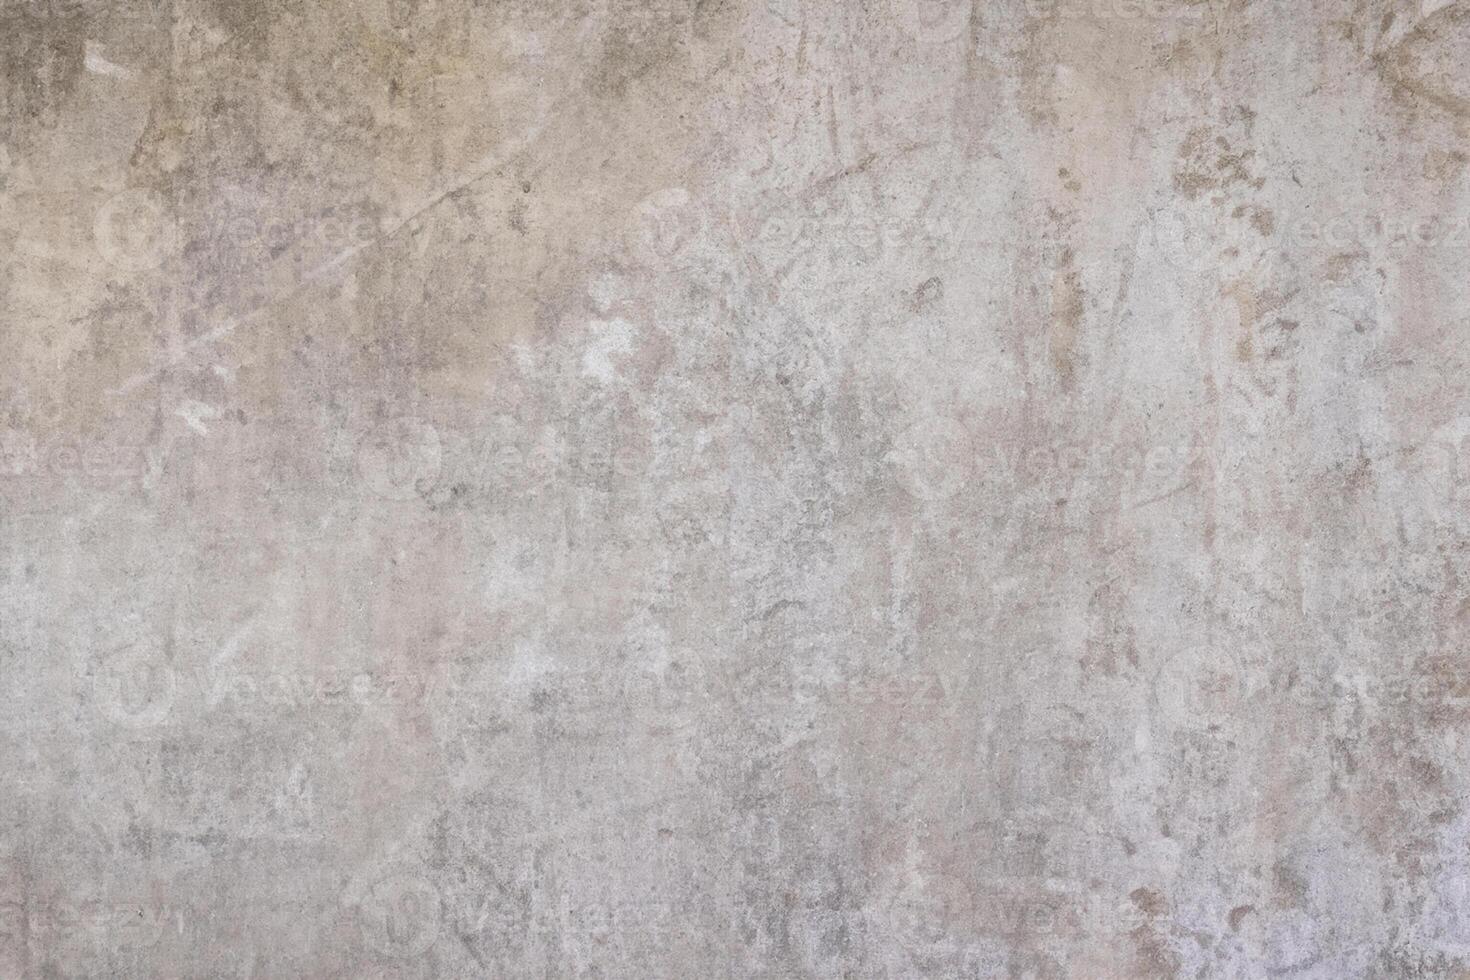 Vintage Aged Cement Wall, Abstract Ground Texture photo